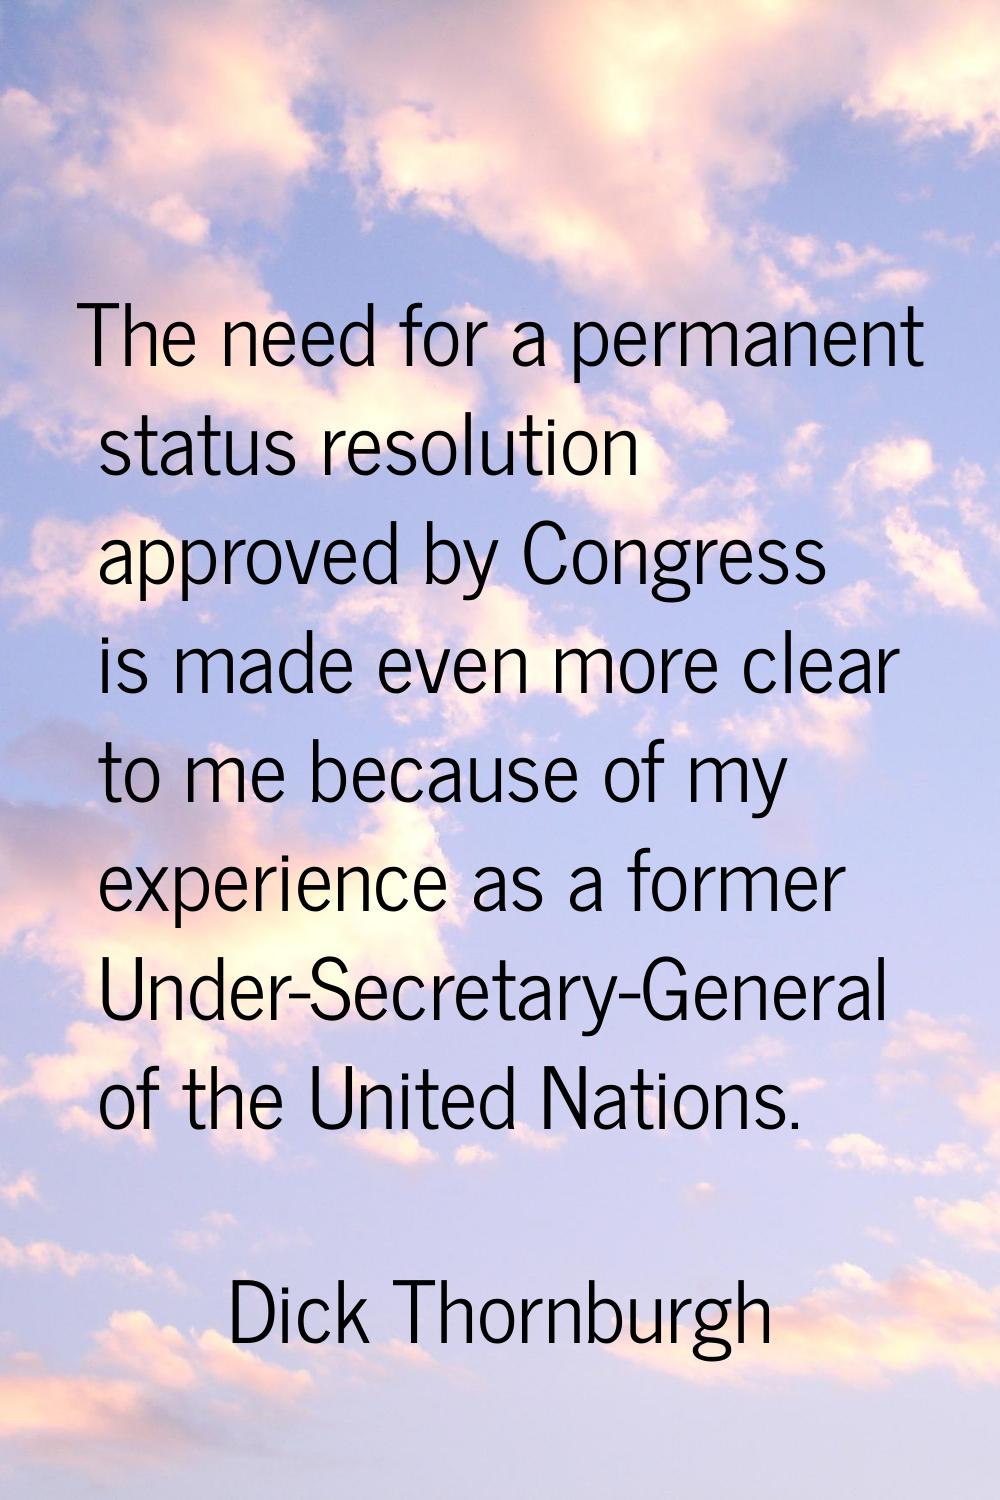 The need for a permanent status resolution approved by Congress is made even more clear to me becau